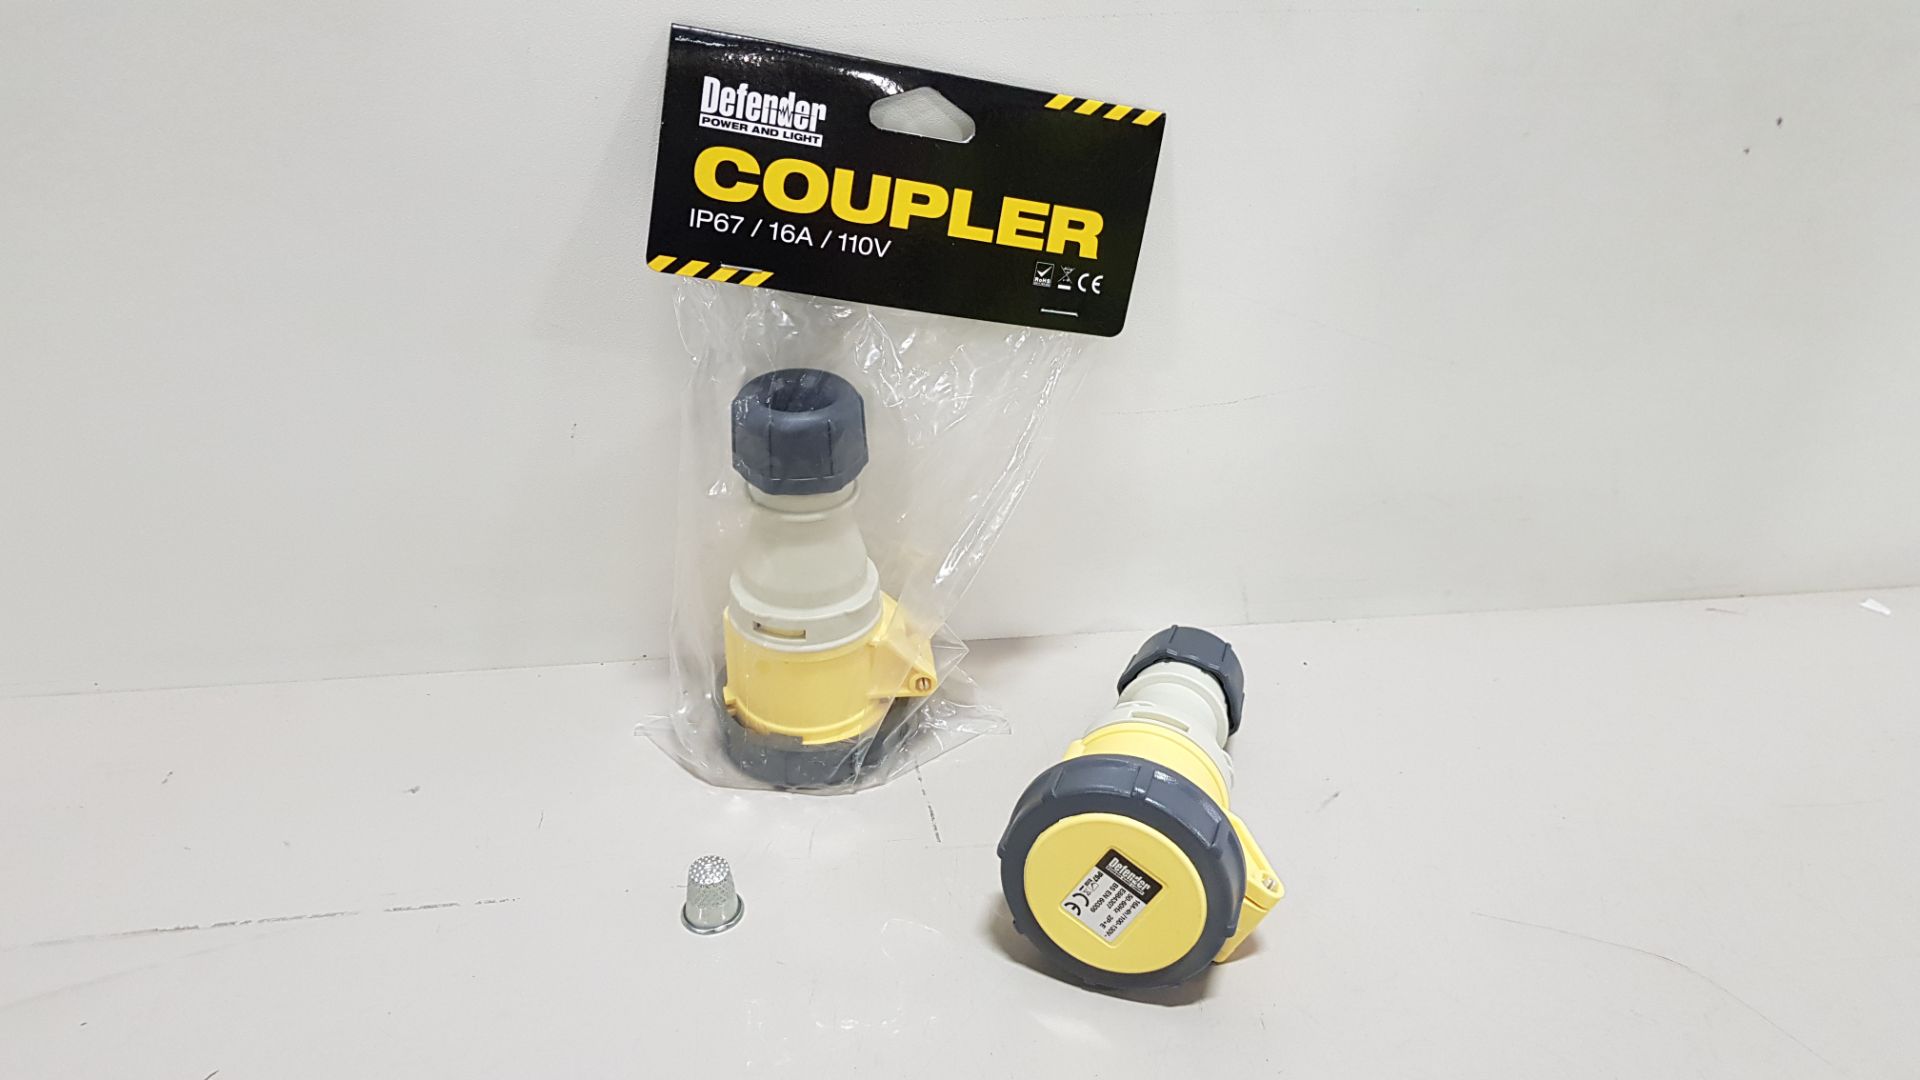 160 X BRAND NEW DEFENDER IP67 110V 16A COUPLER IN RETAIL BLISTER PACKS (CODE E884307) - IN 2 BOXES